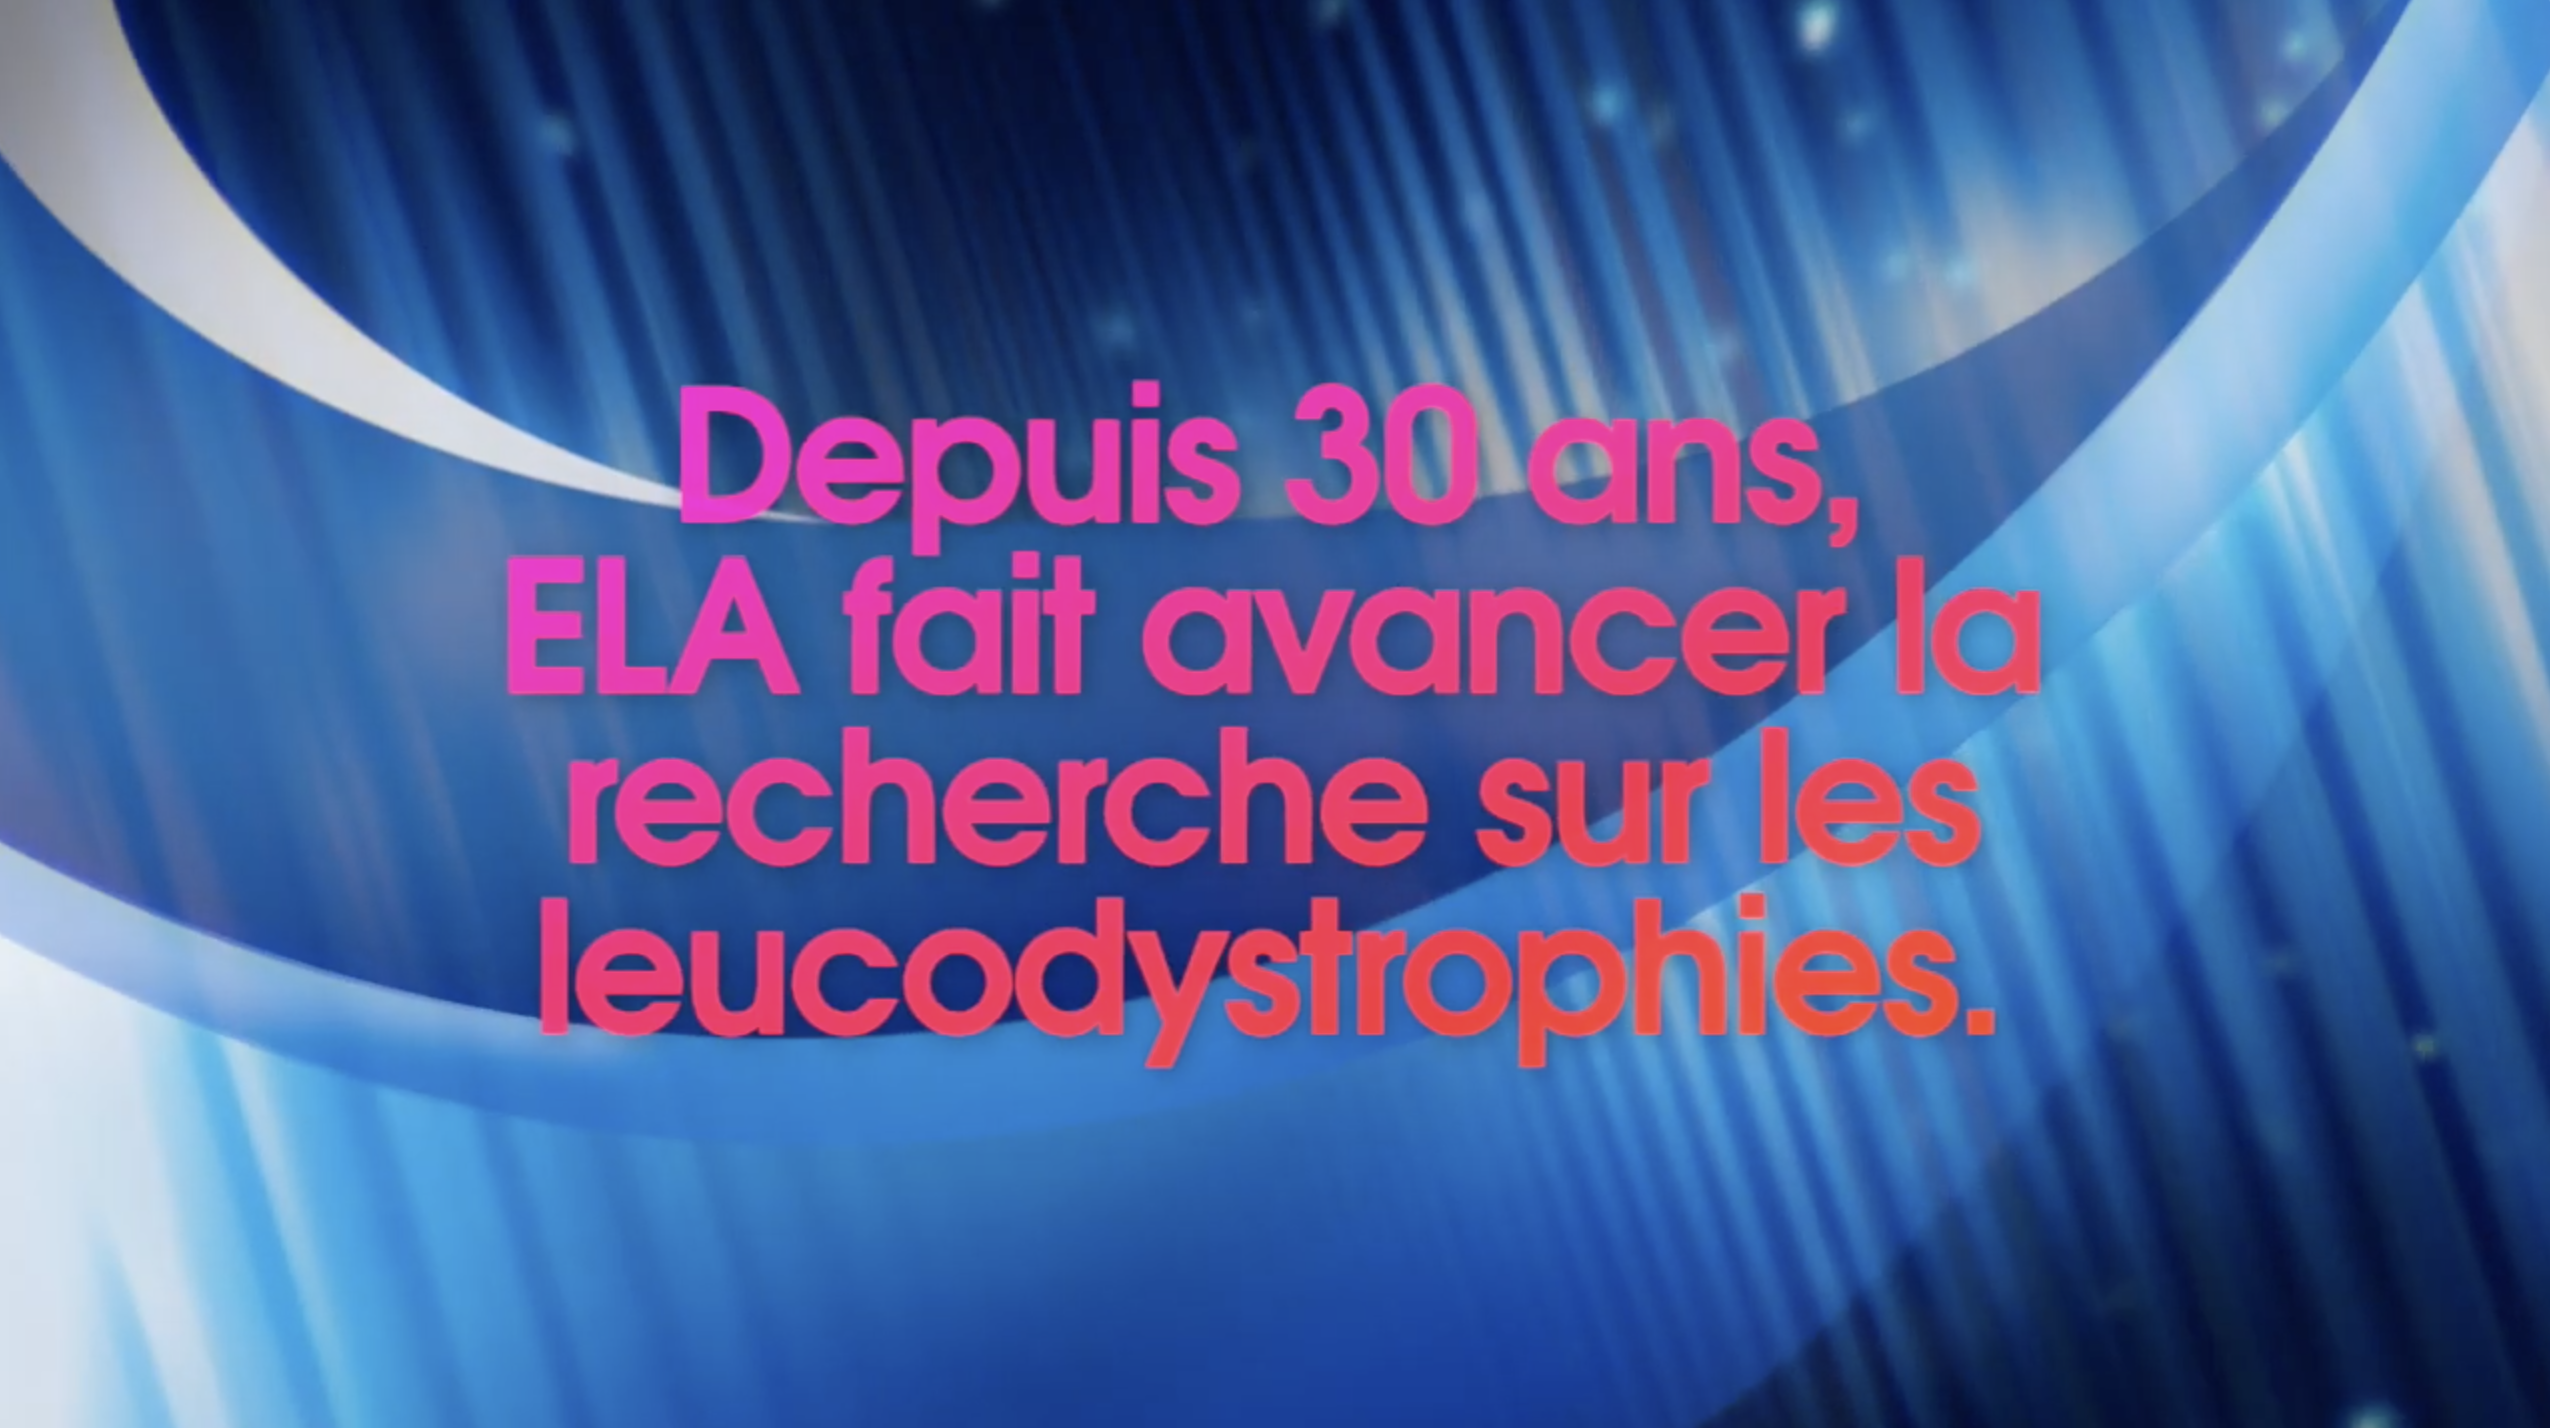 For 30 years, ELA supports the research on leukodystrophies